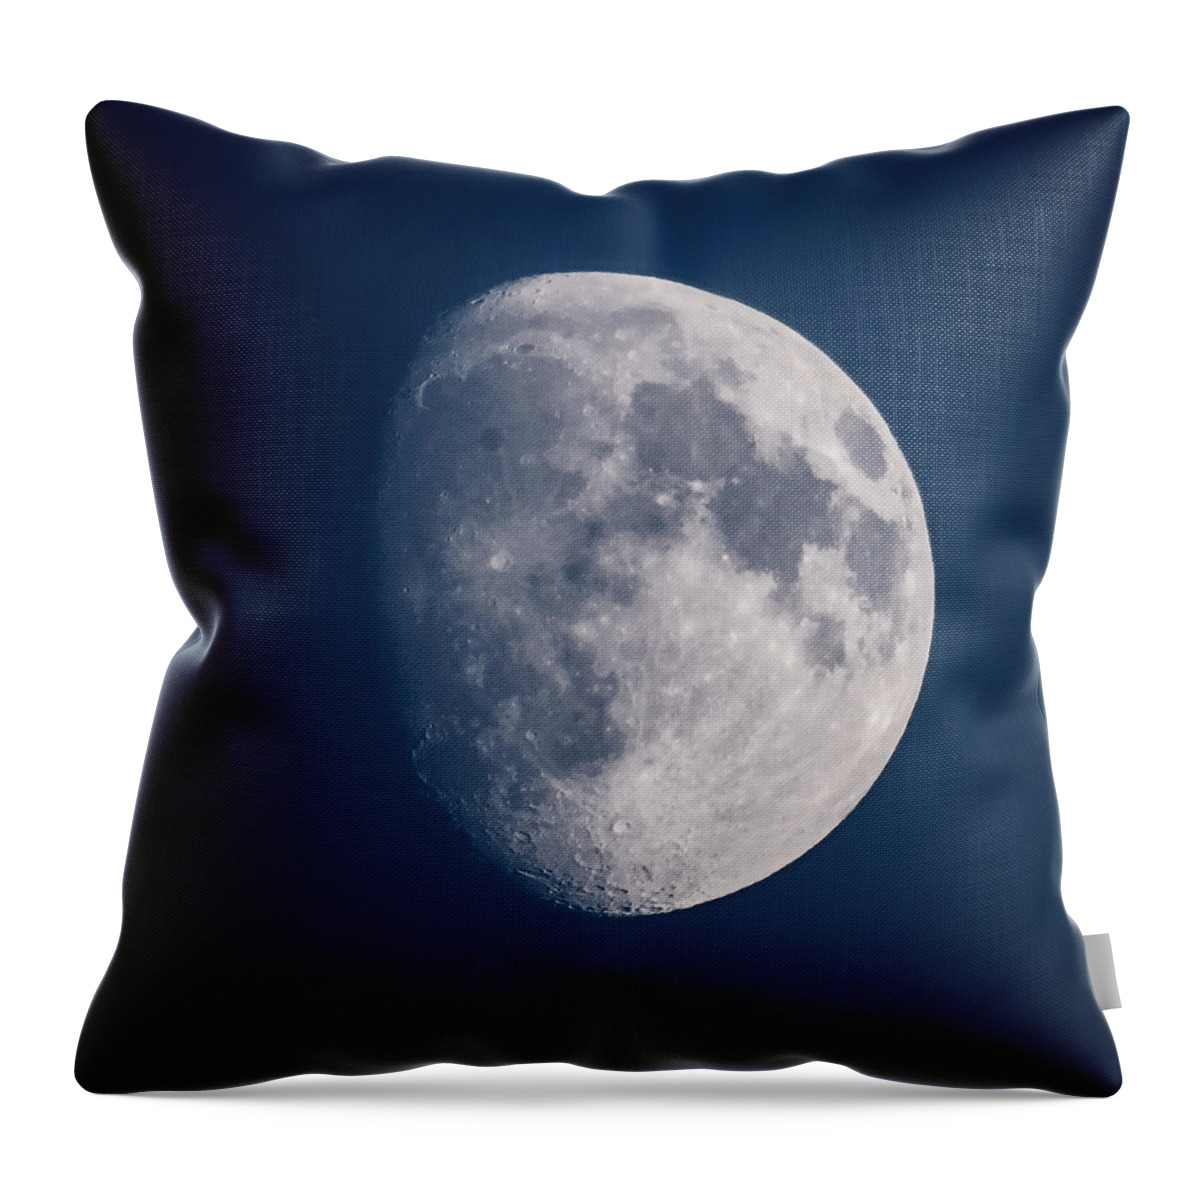 Outdoors Throw Pillow featuring the photograph Waxing Gibbous Moon by Arctic-images